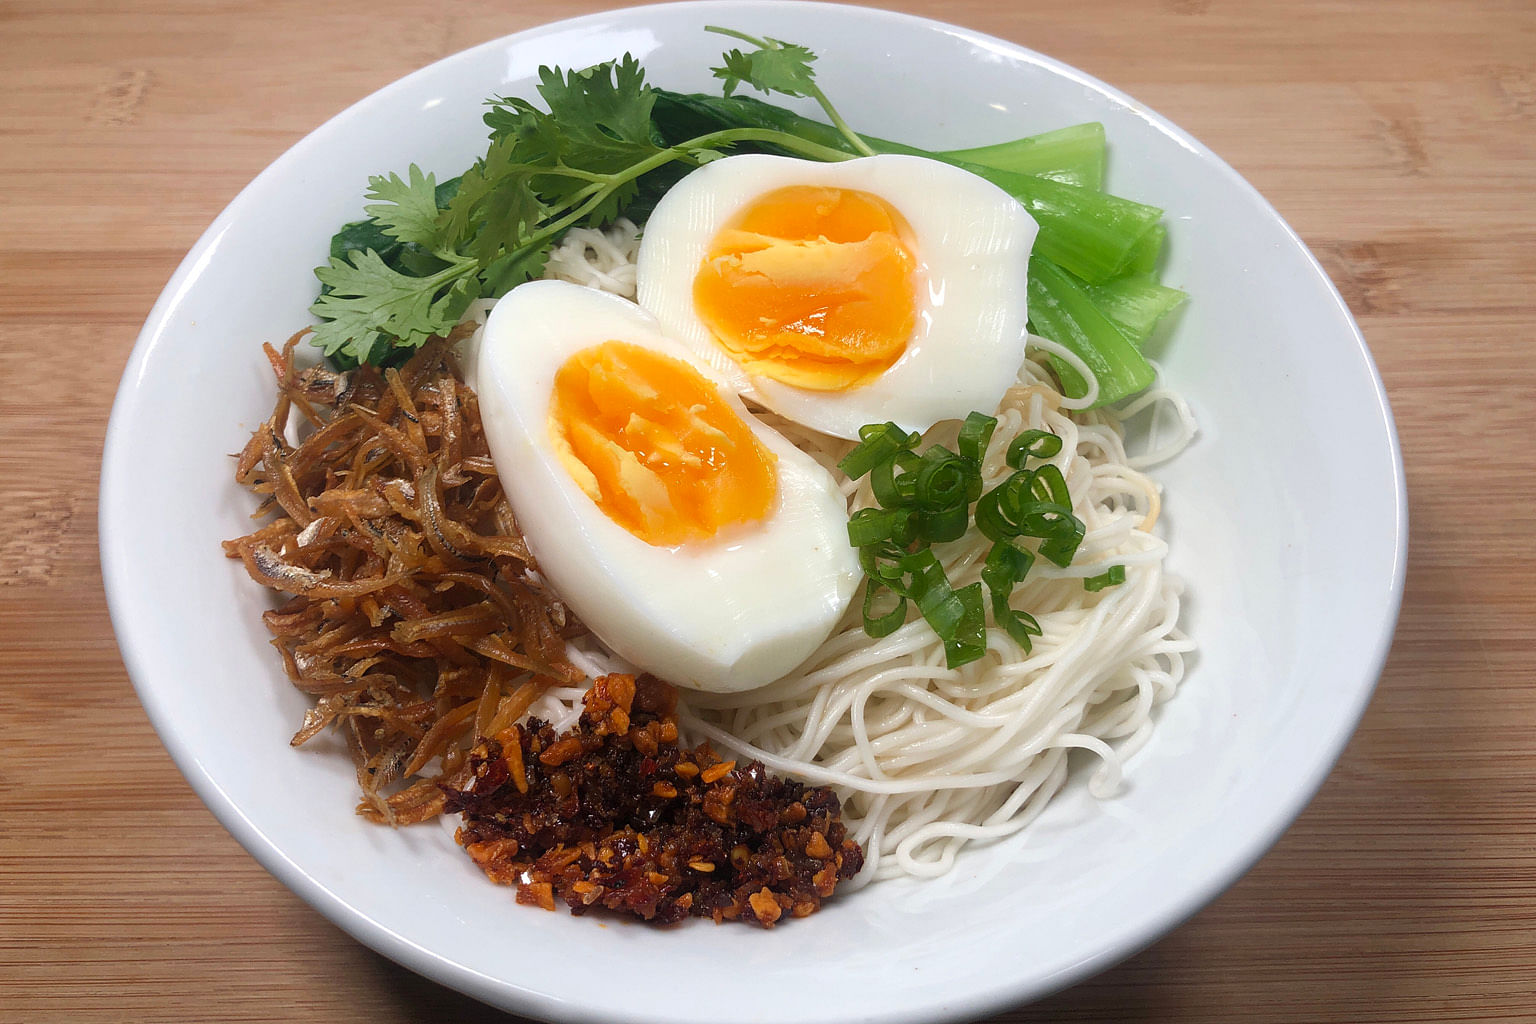 SCAN TO WATCH How to make Huai Shan Noodles With Egg. Go to str.sg/huaishan